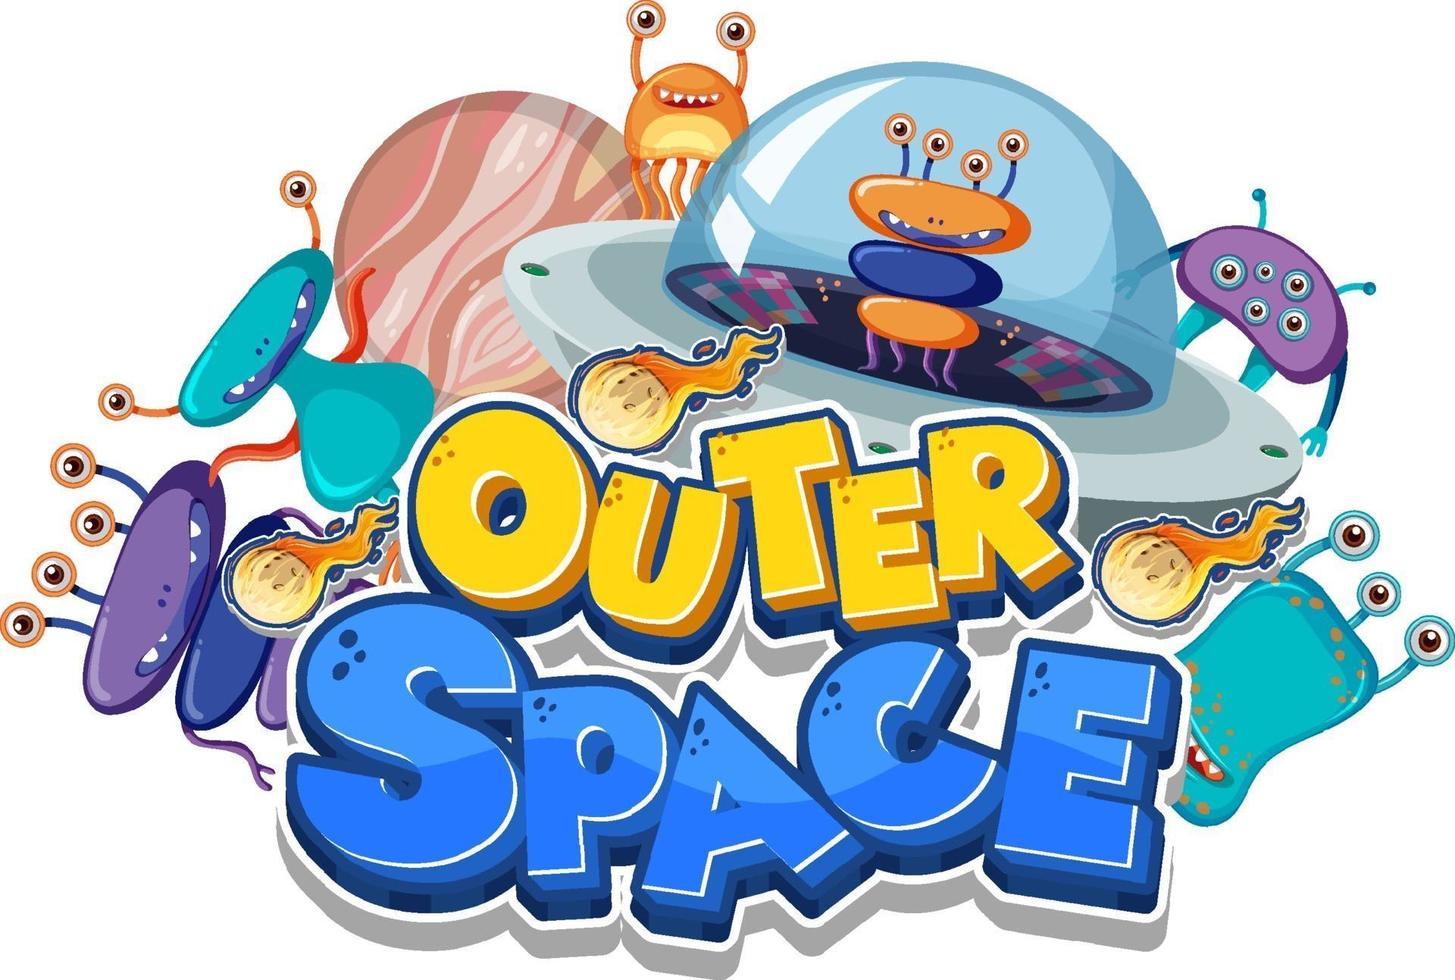 Outer Space logo with many aliens vector